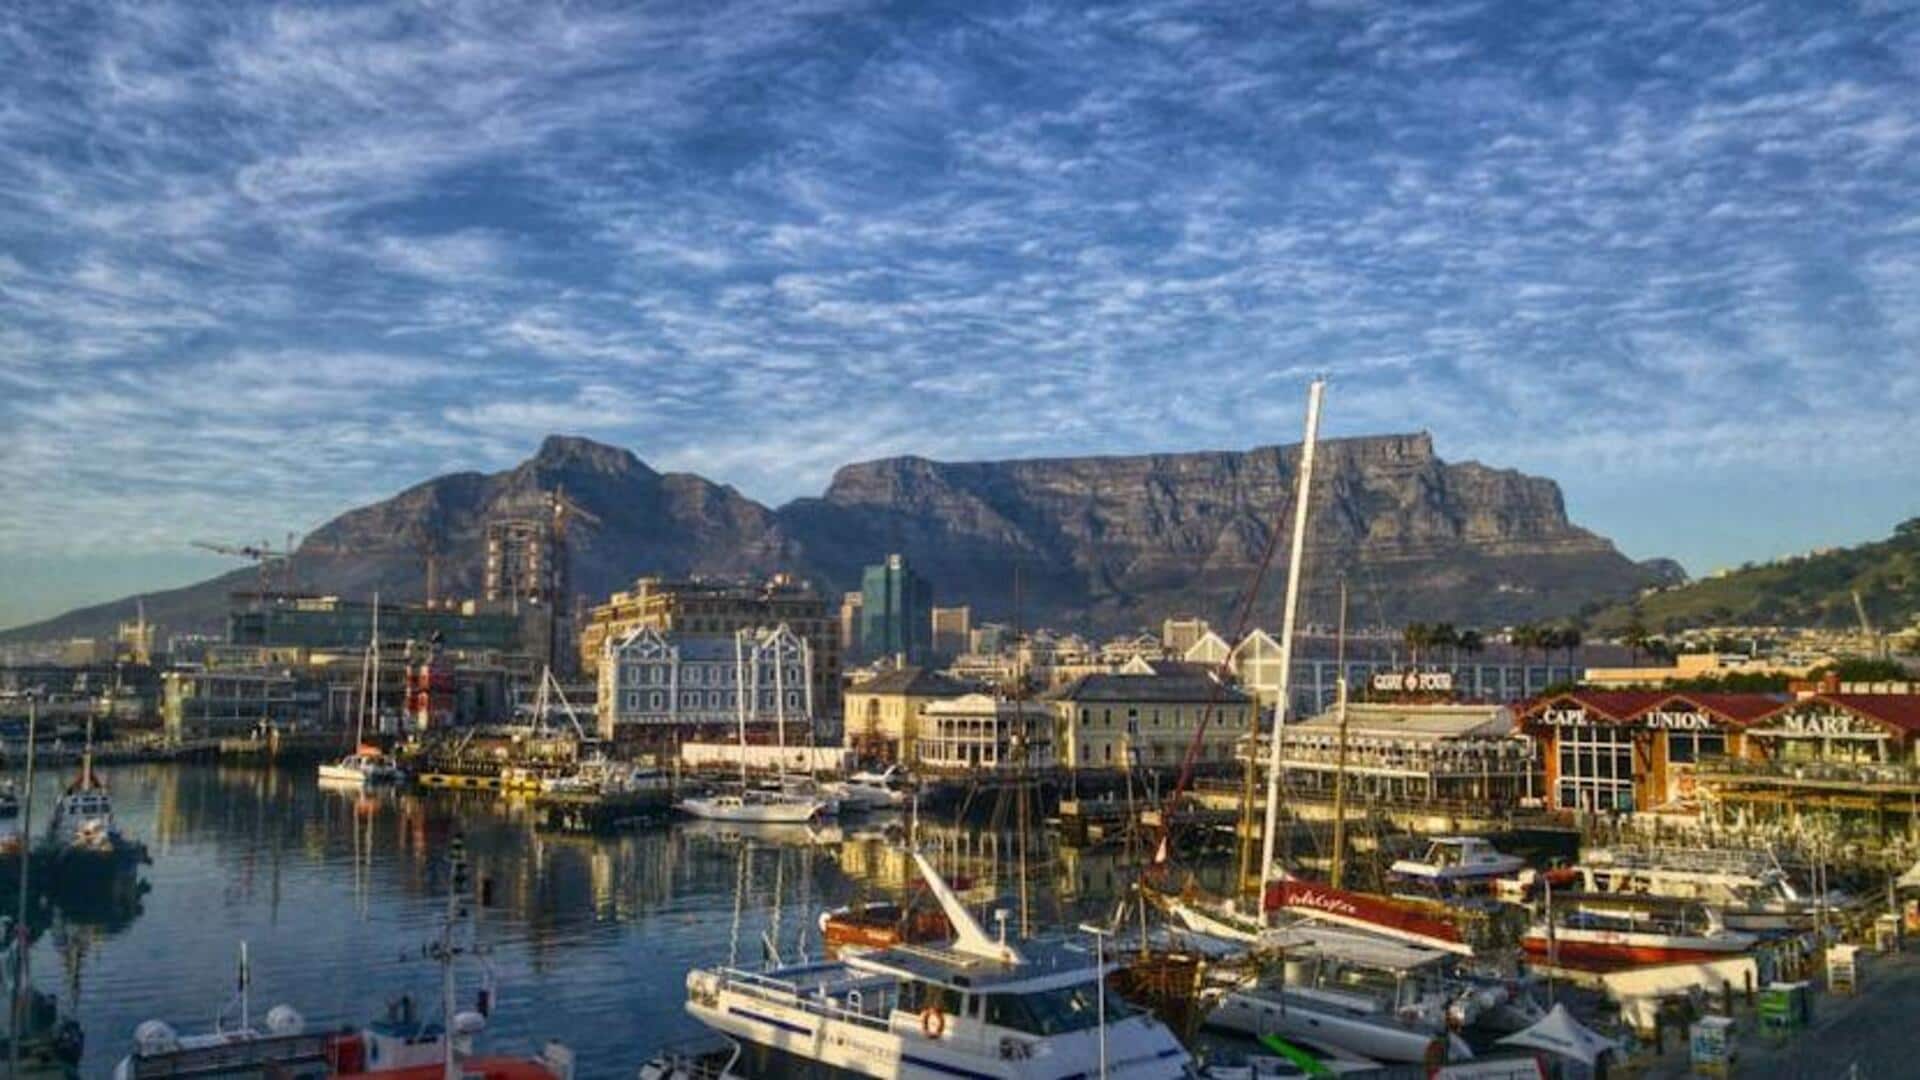 Explore Cape Town's hidden treasures with this guide